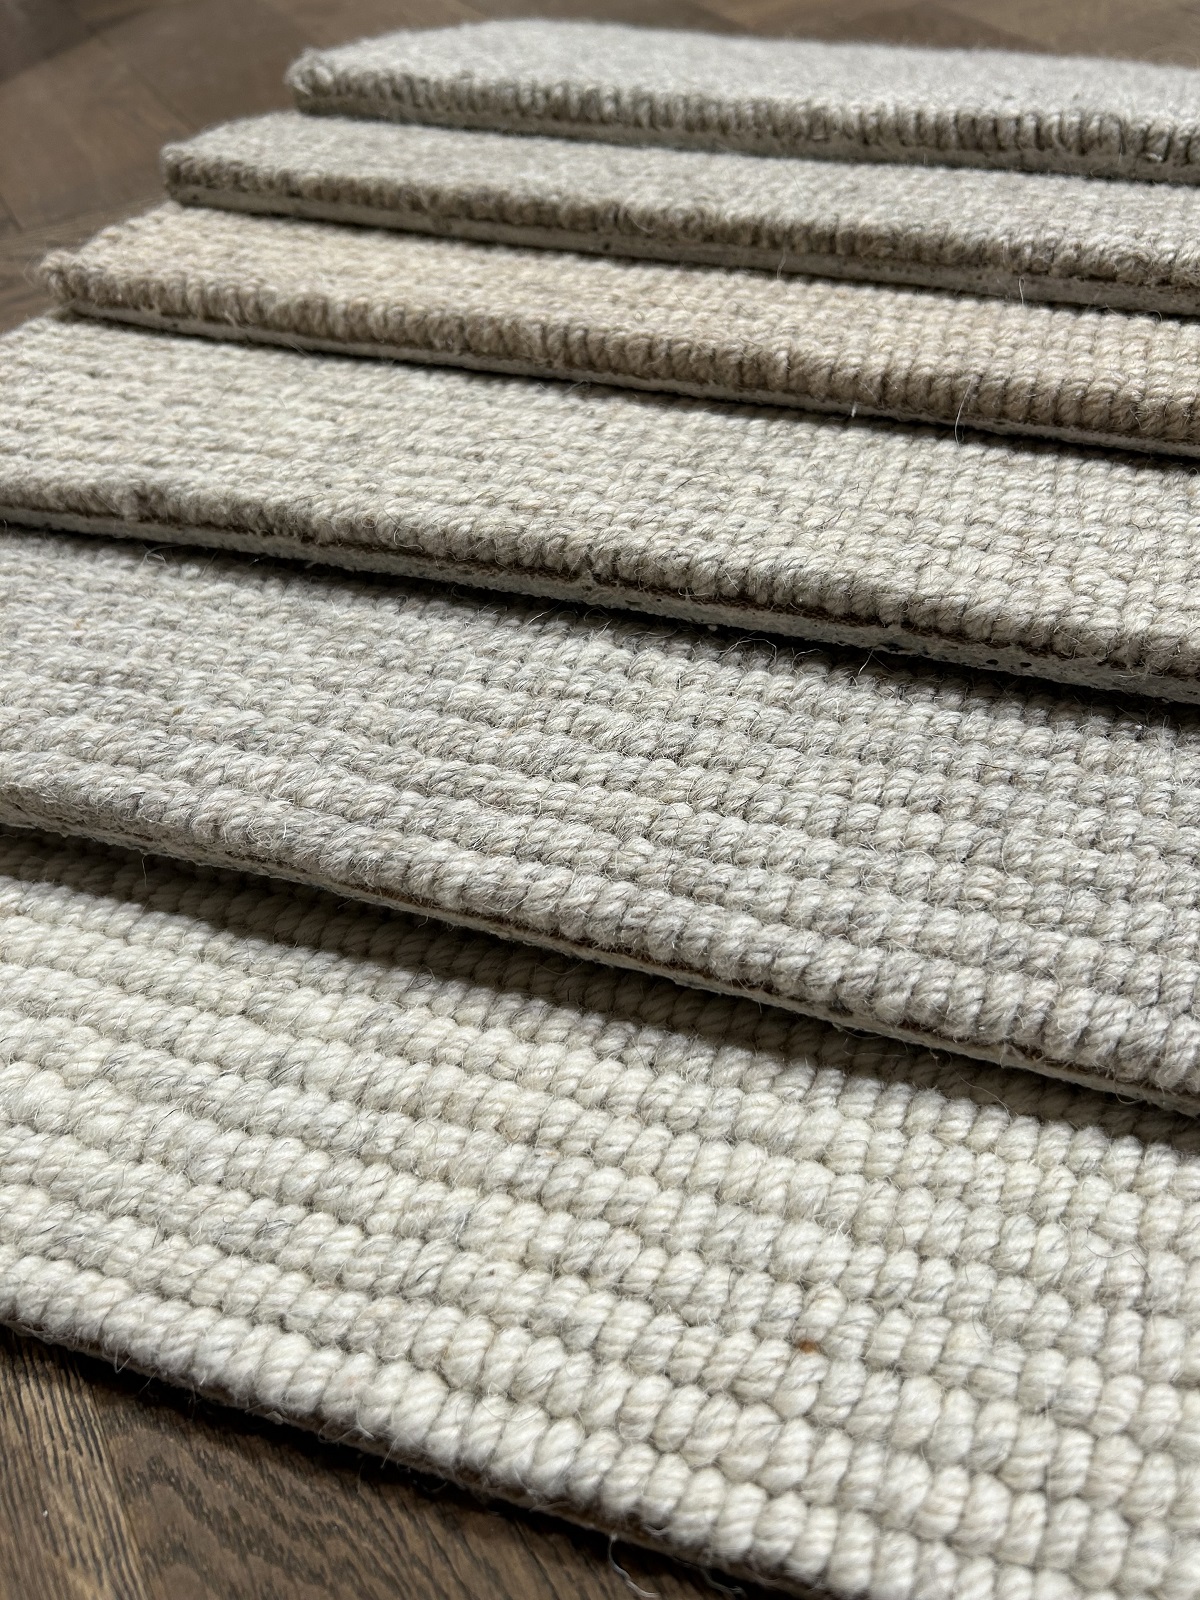 textured and striped wool carpet in natural colours cream and brown